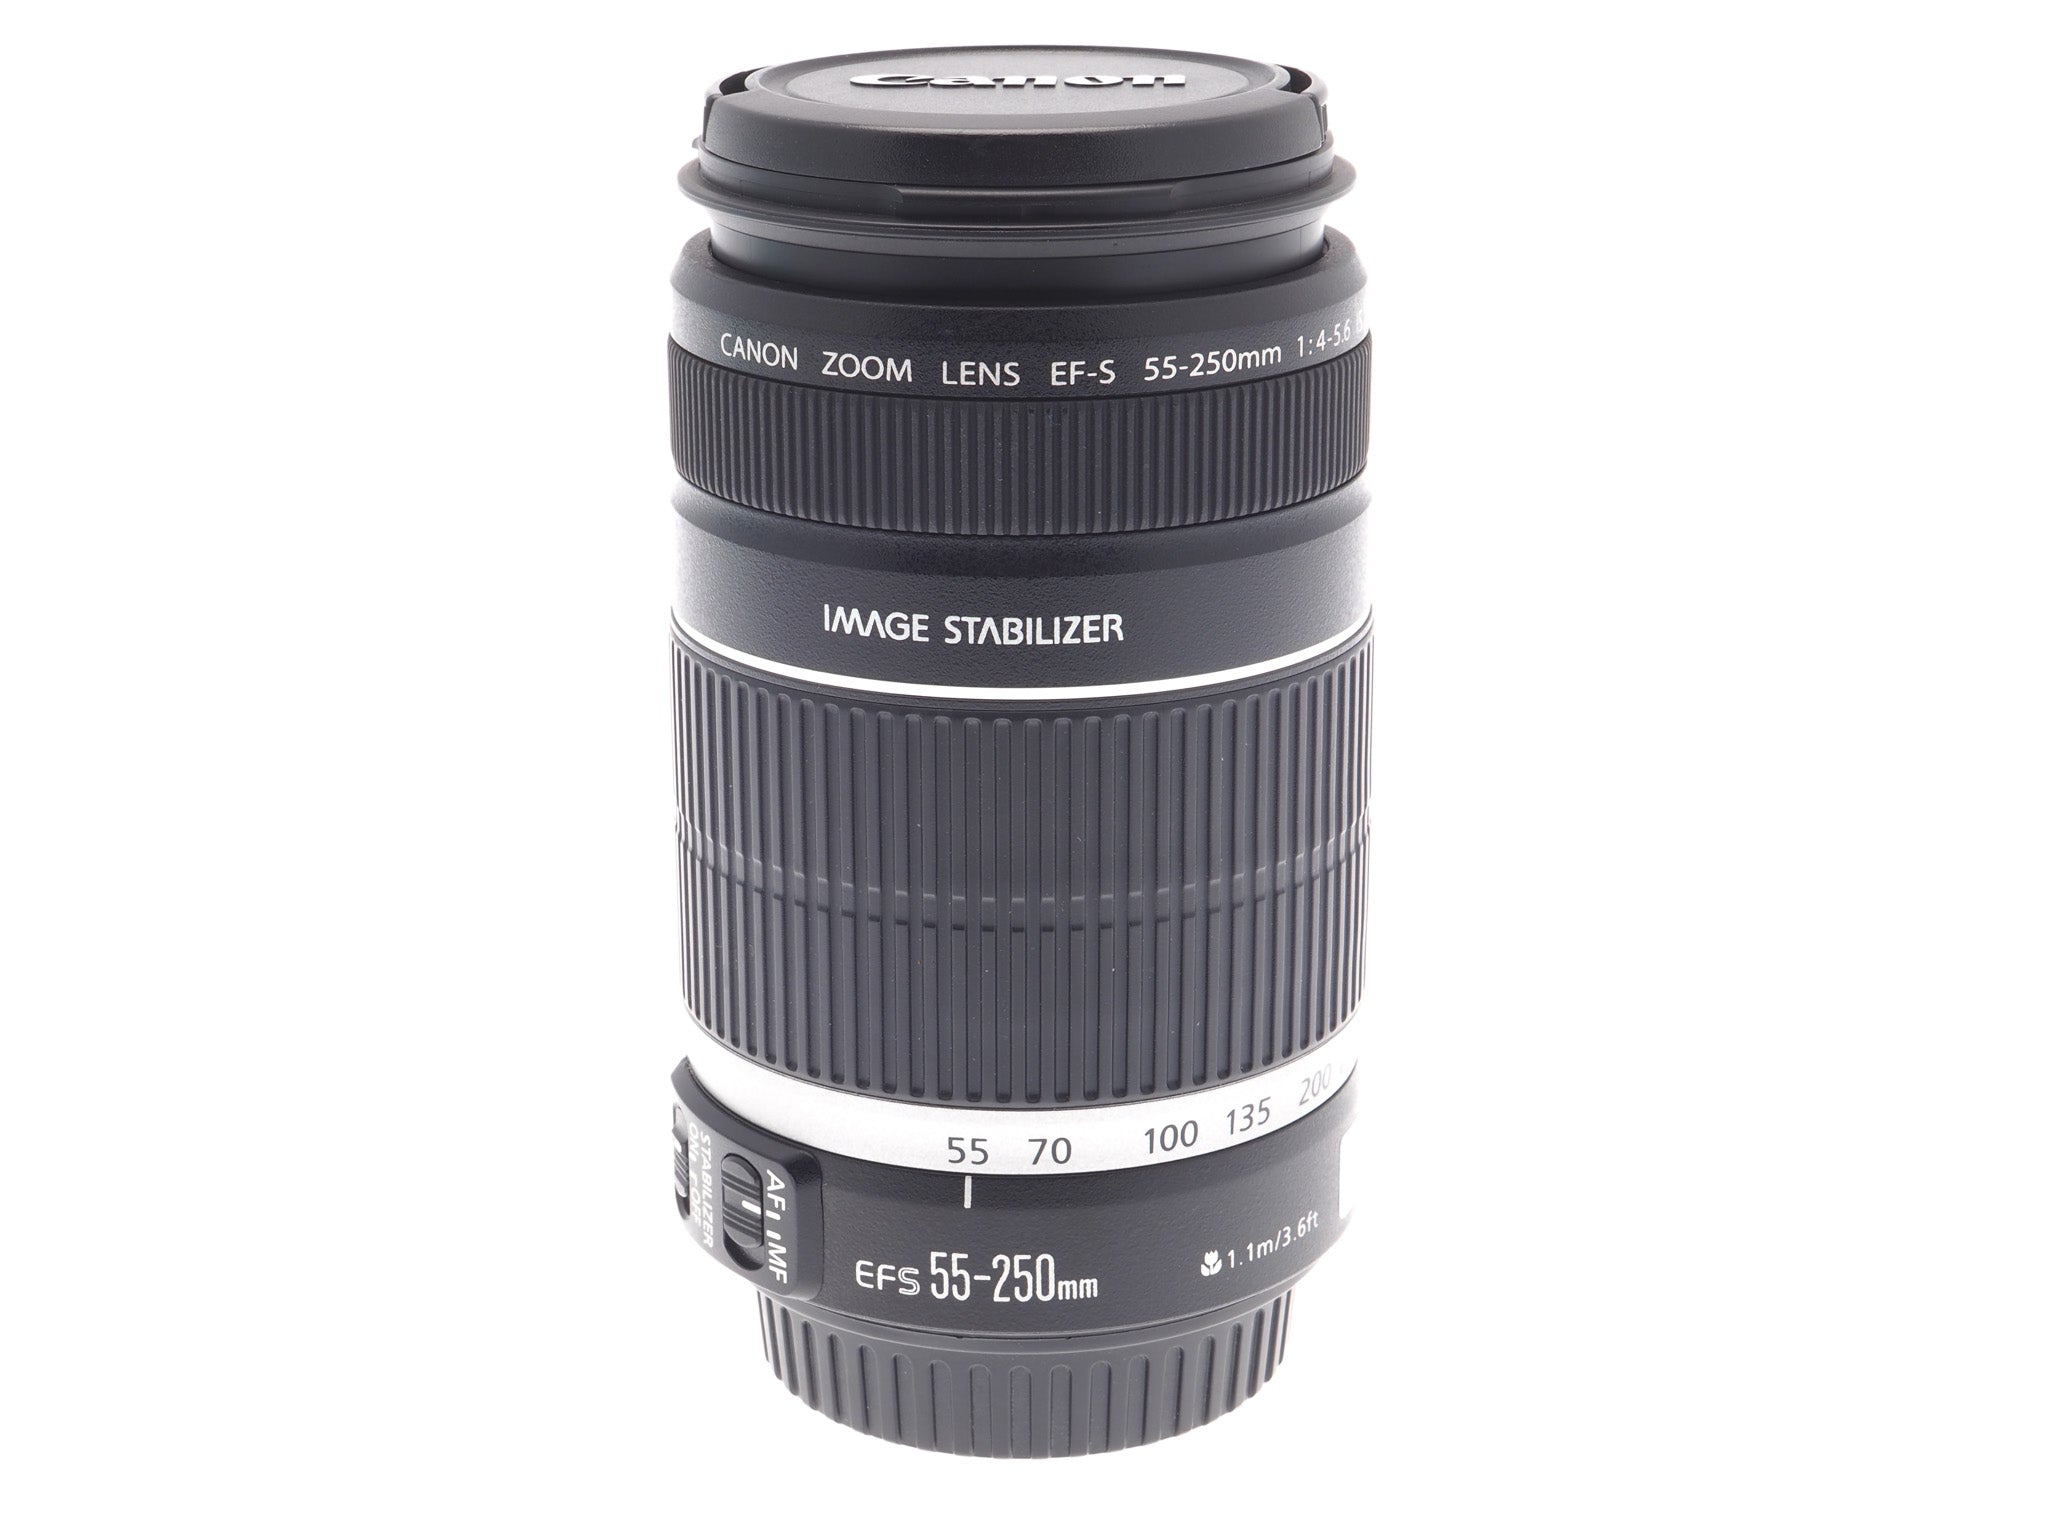 Canon 55-250mm f4-5.6 IS - Lens